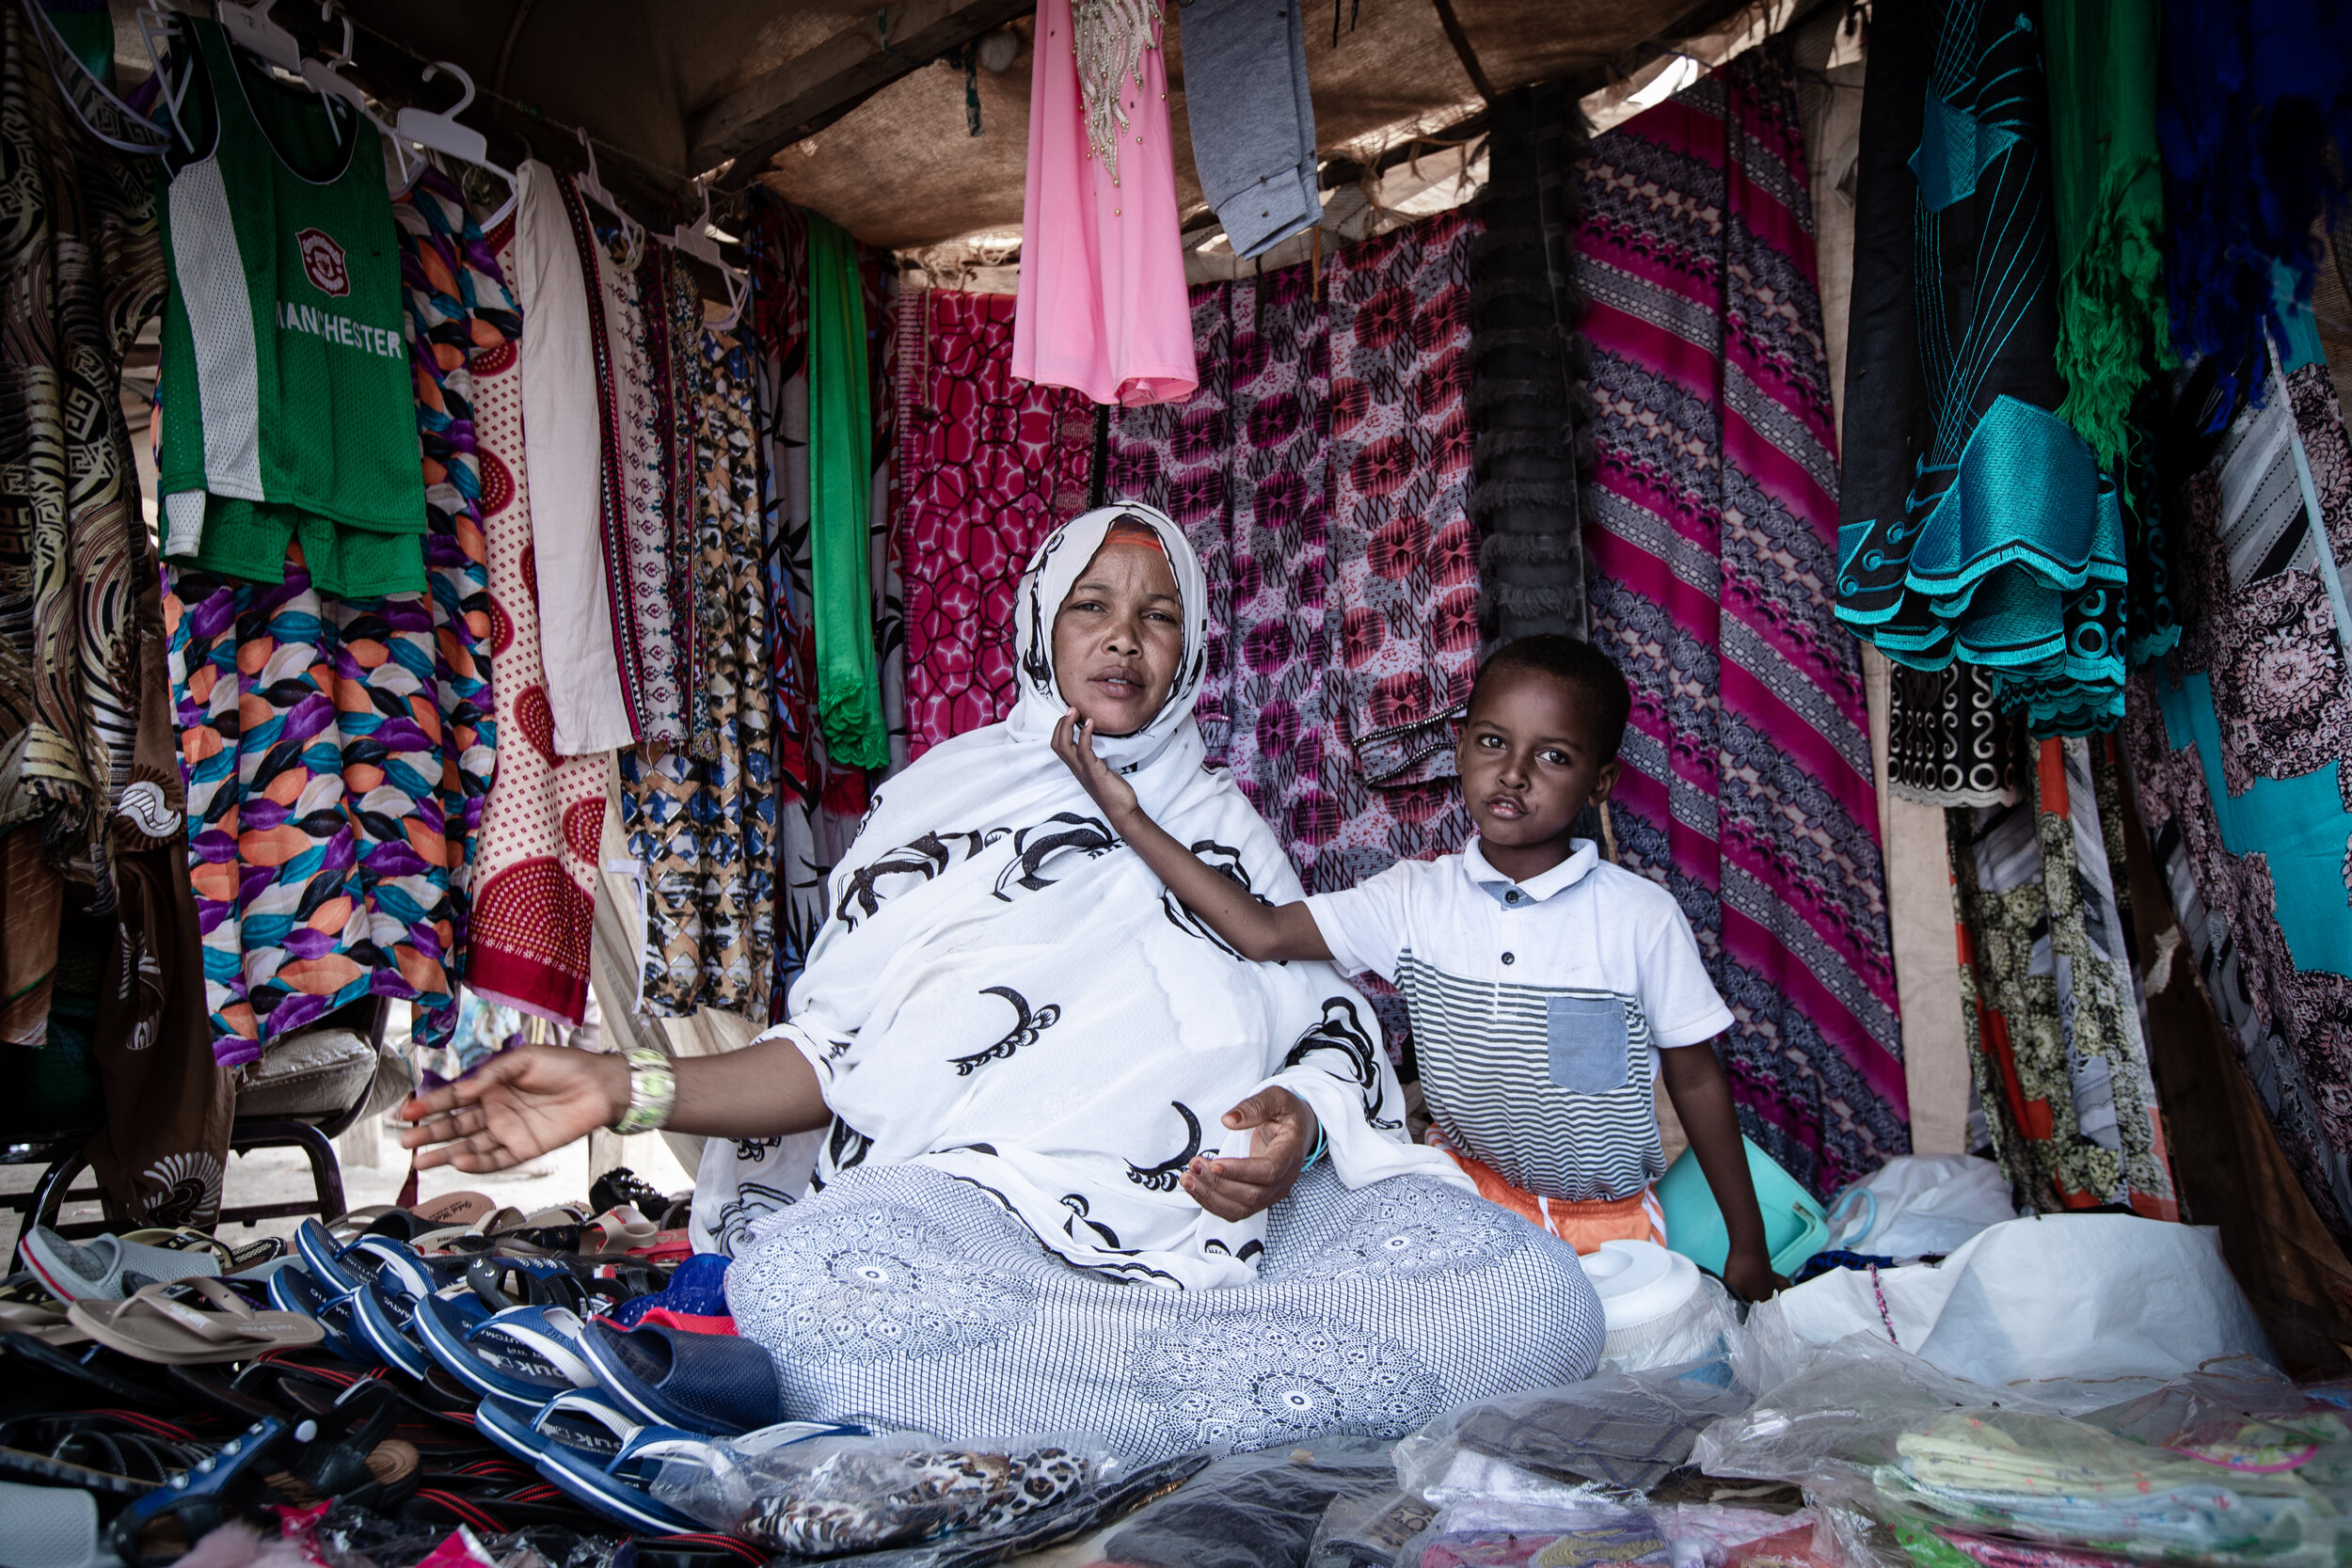  at a textile street shop in Damerjog IDP camp in Djibouti, which holds several IDP camps for the internally displaced communities. those in search for work opportunities in the city or having to leave their homes due to the damages caused by frequen